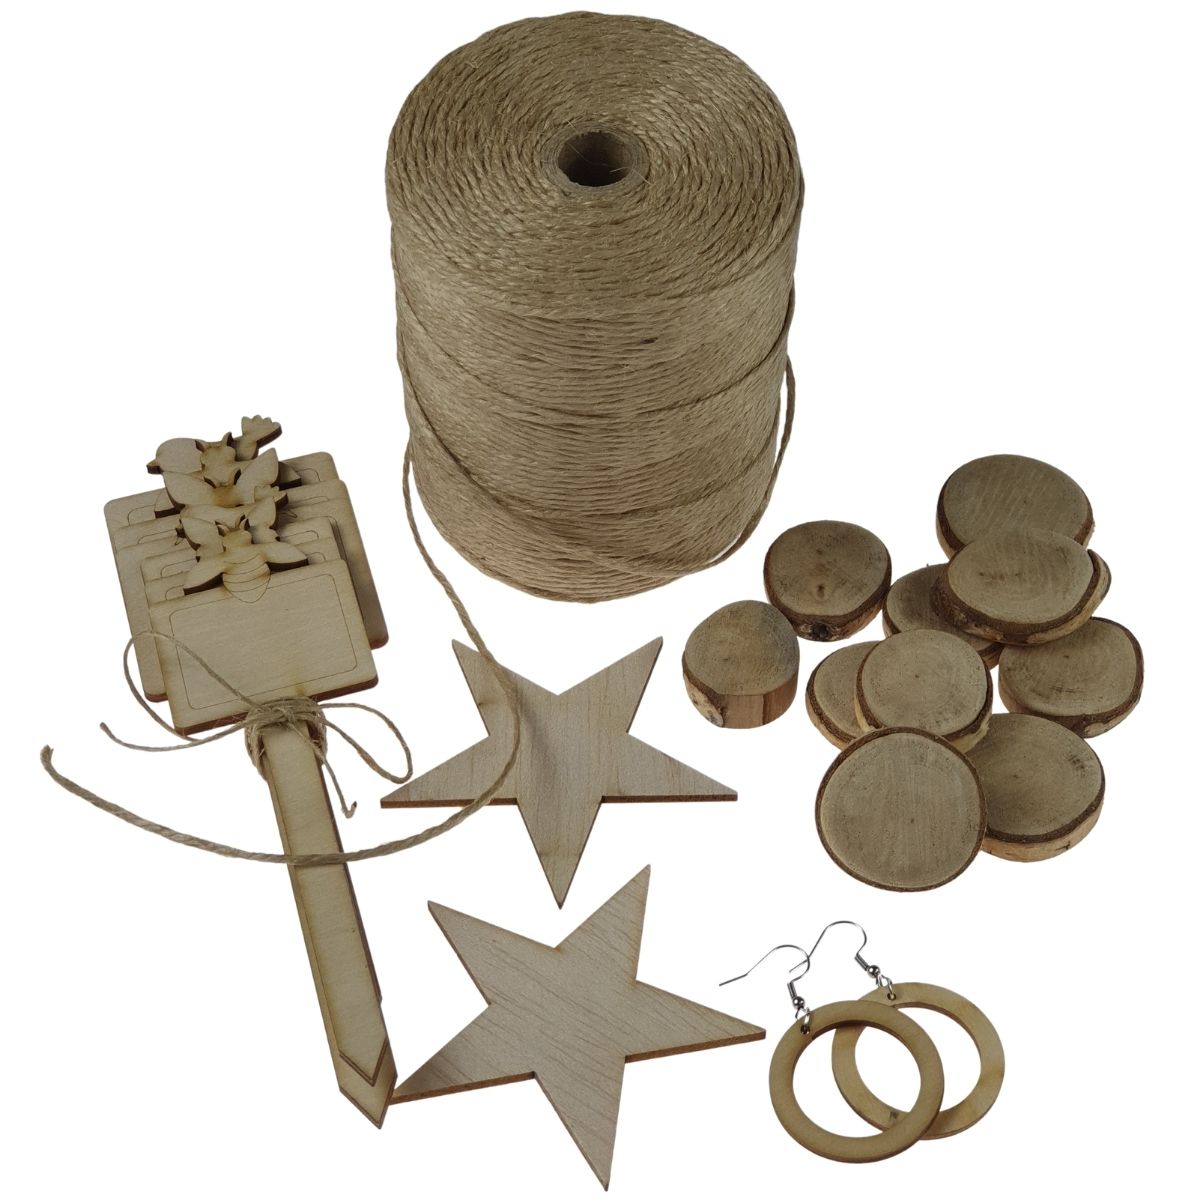 Craft Material - Wood shapes, Kits and more